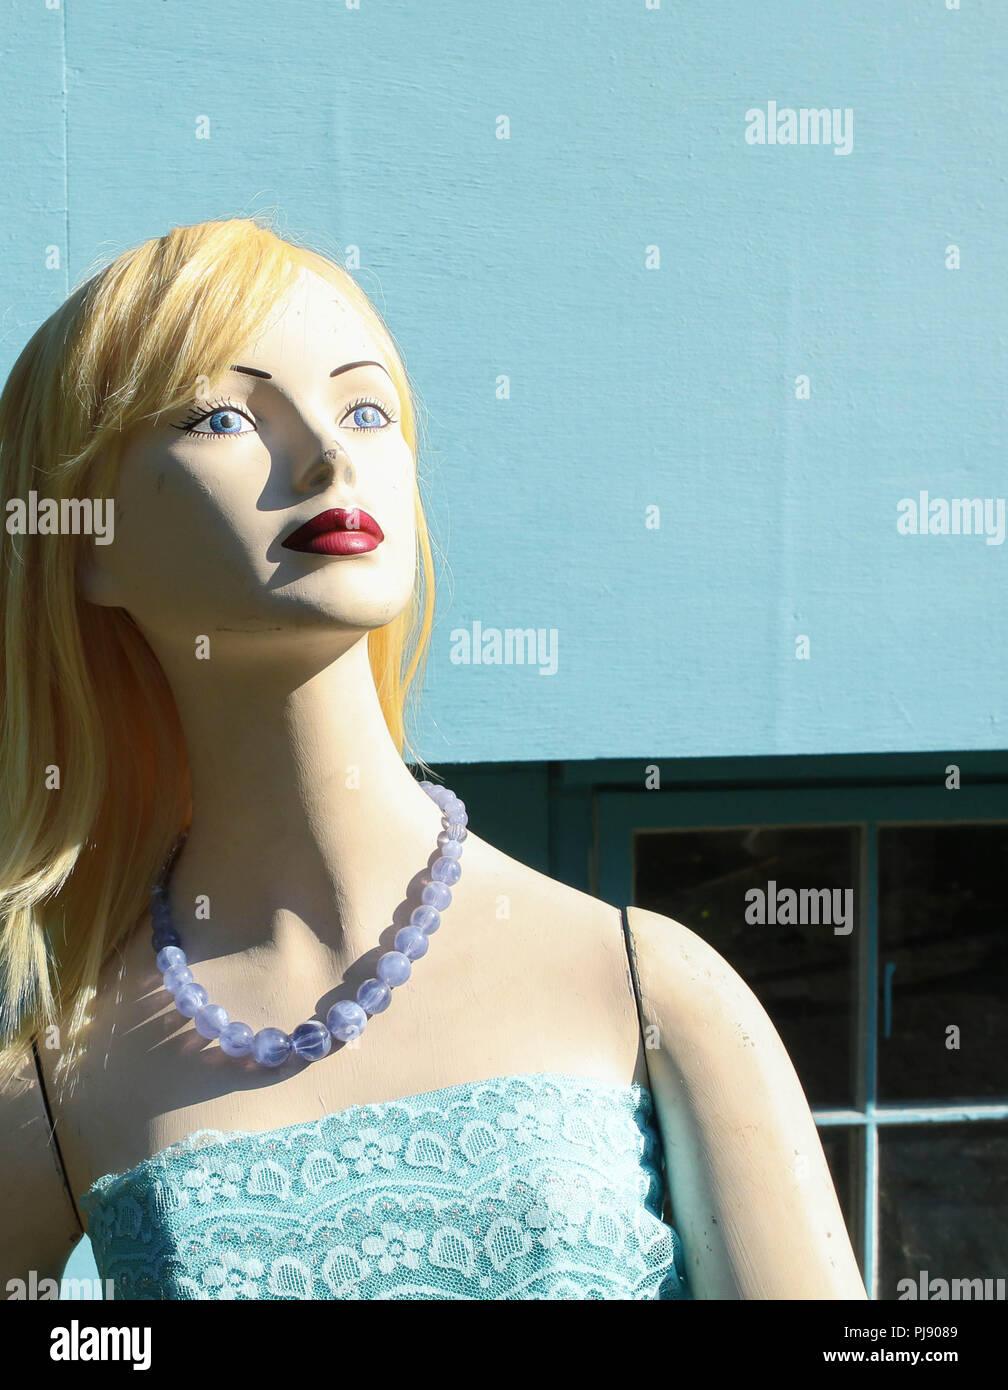 Head and shoulders of lady mannequin standing in front of blue building. Stock Photo